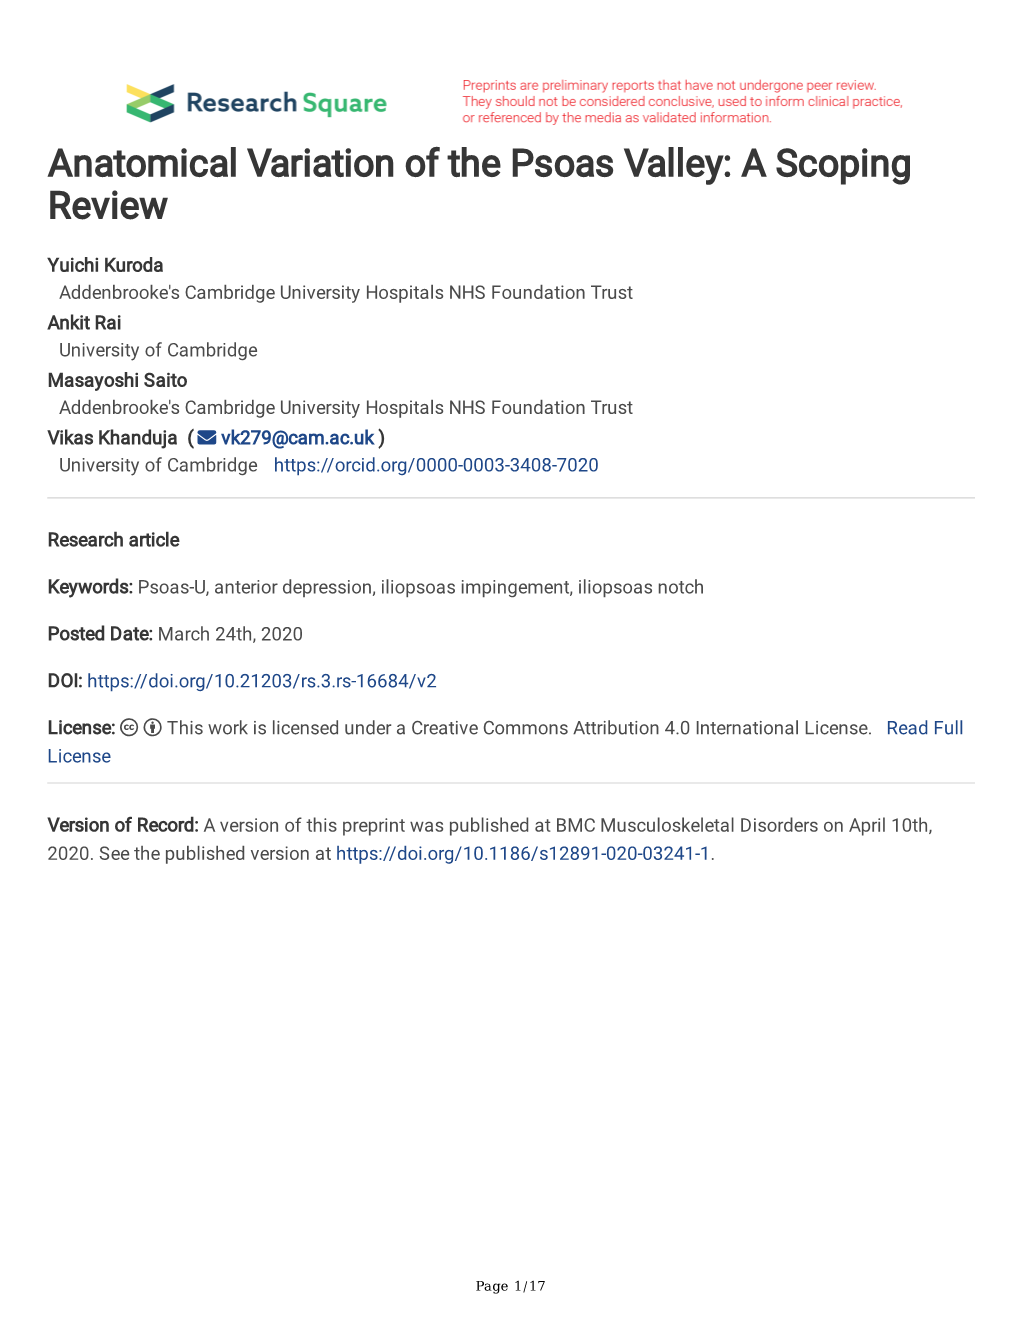 Anatomical Variation of the Psoas Valley: a Scoping Review